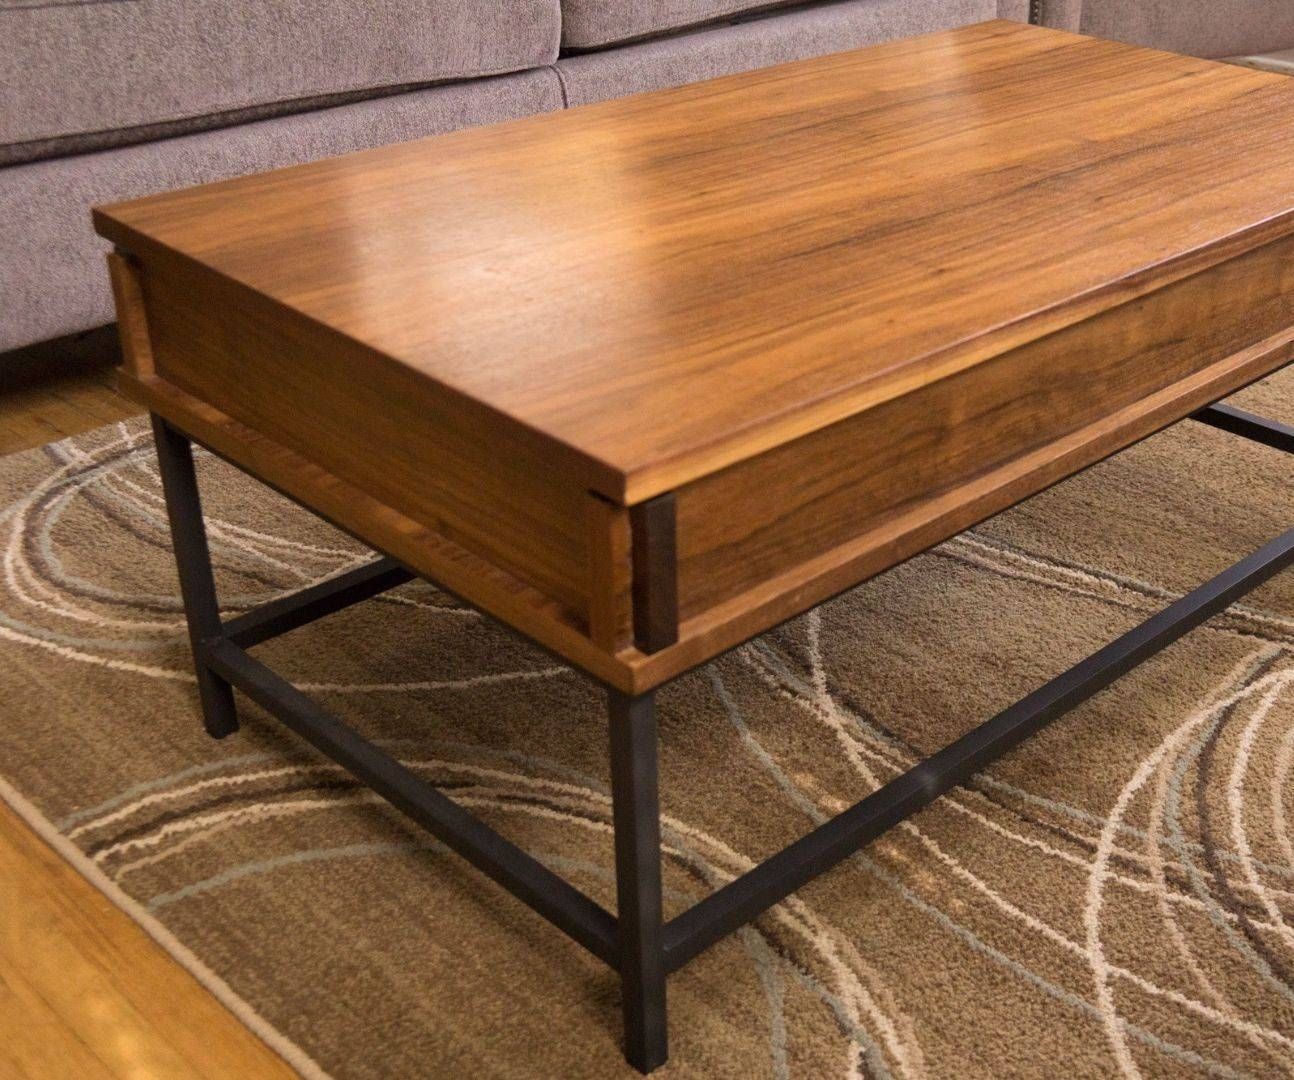 How To Make A Coffee Table With Lift Top: 18 Steps (with Pictures) With Regard To Coffee Tables Top Lifts Up (View 18 of 30)